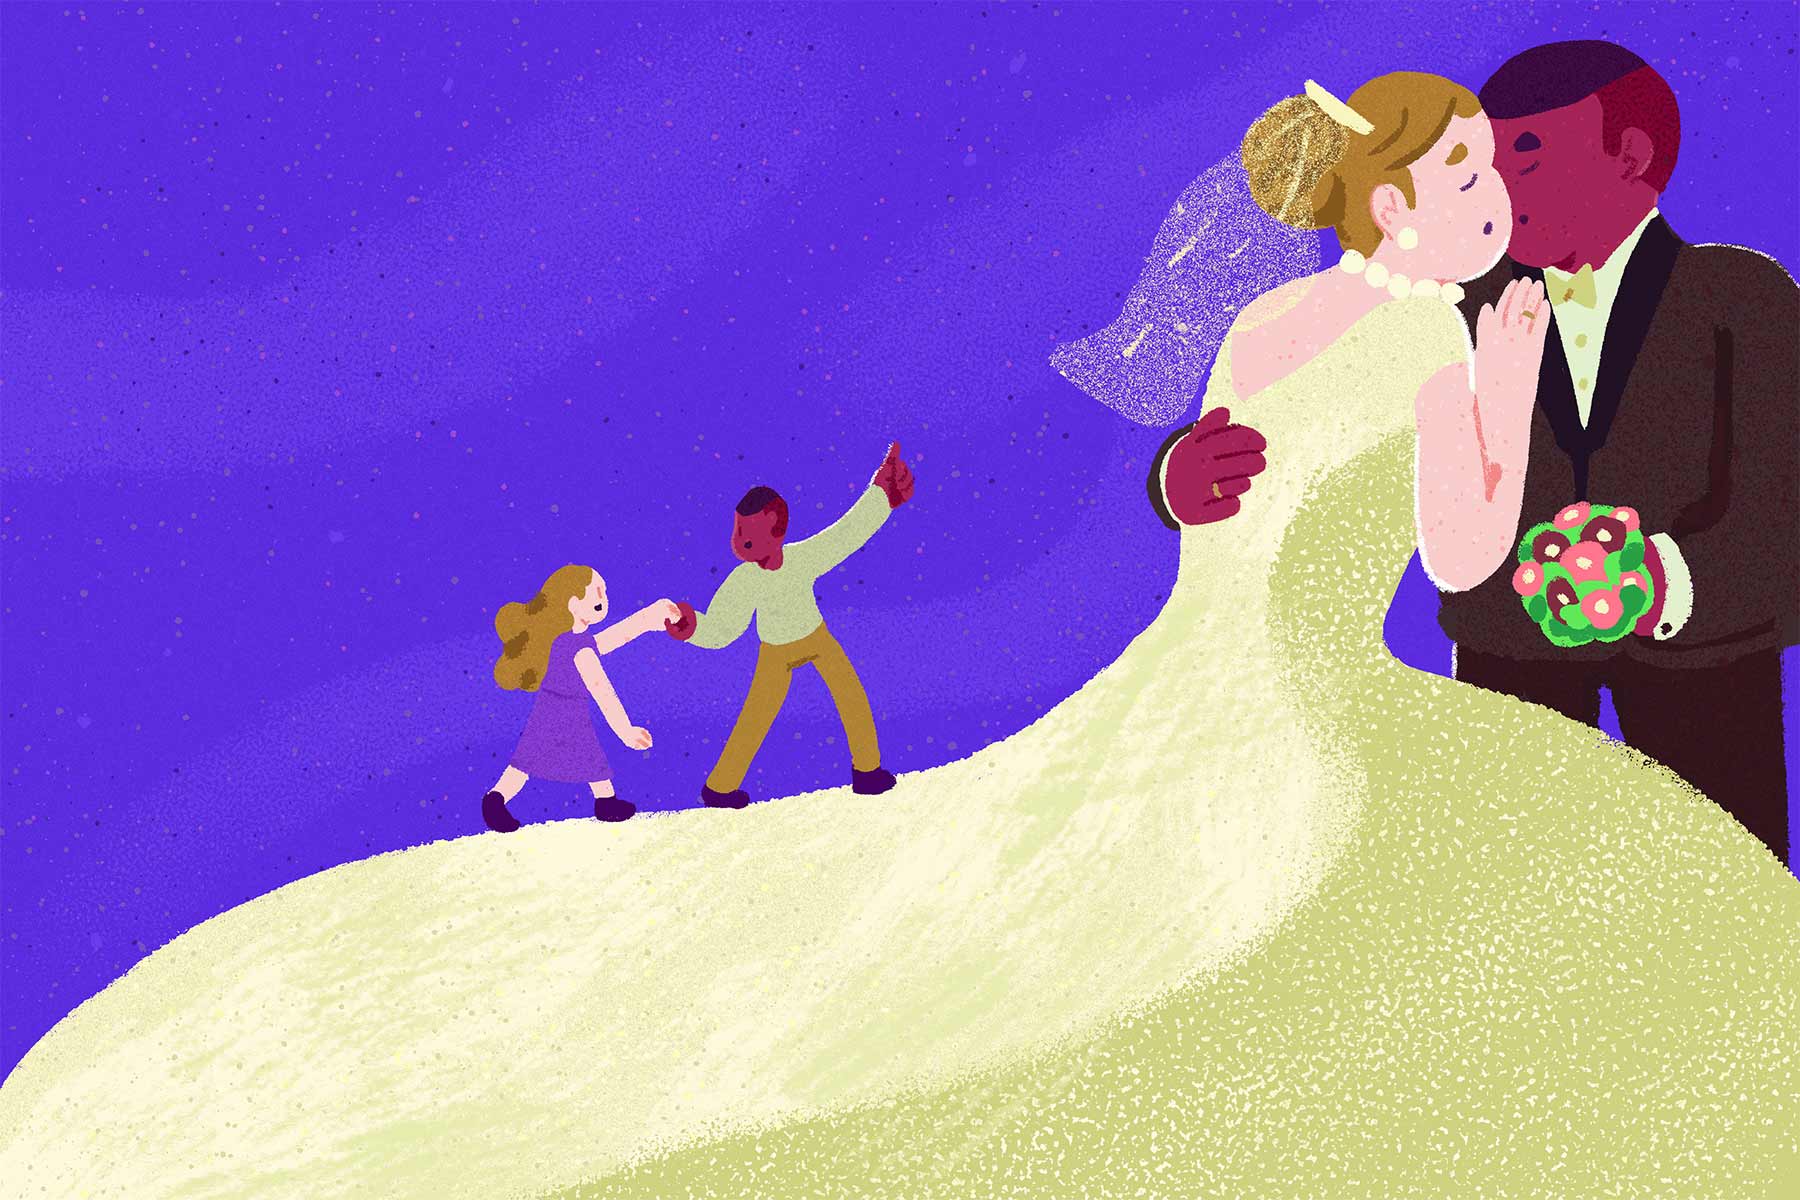 An illustration of a bride and groom on their wedding day, with their miniaturized younger selves holding hands while climbing up the back of the bride’s dress.